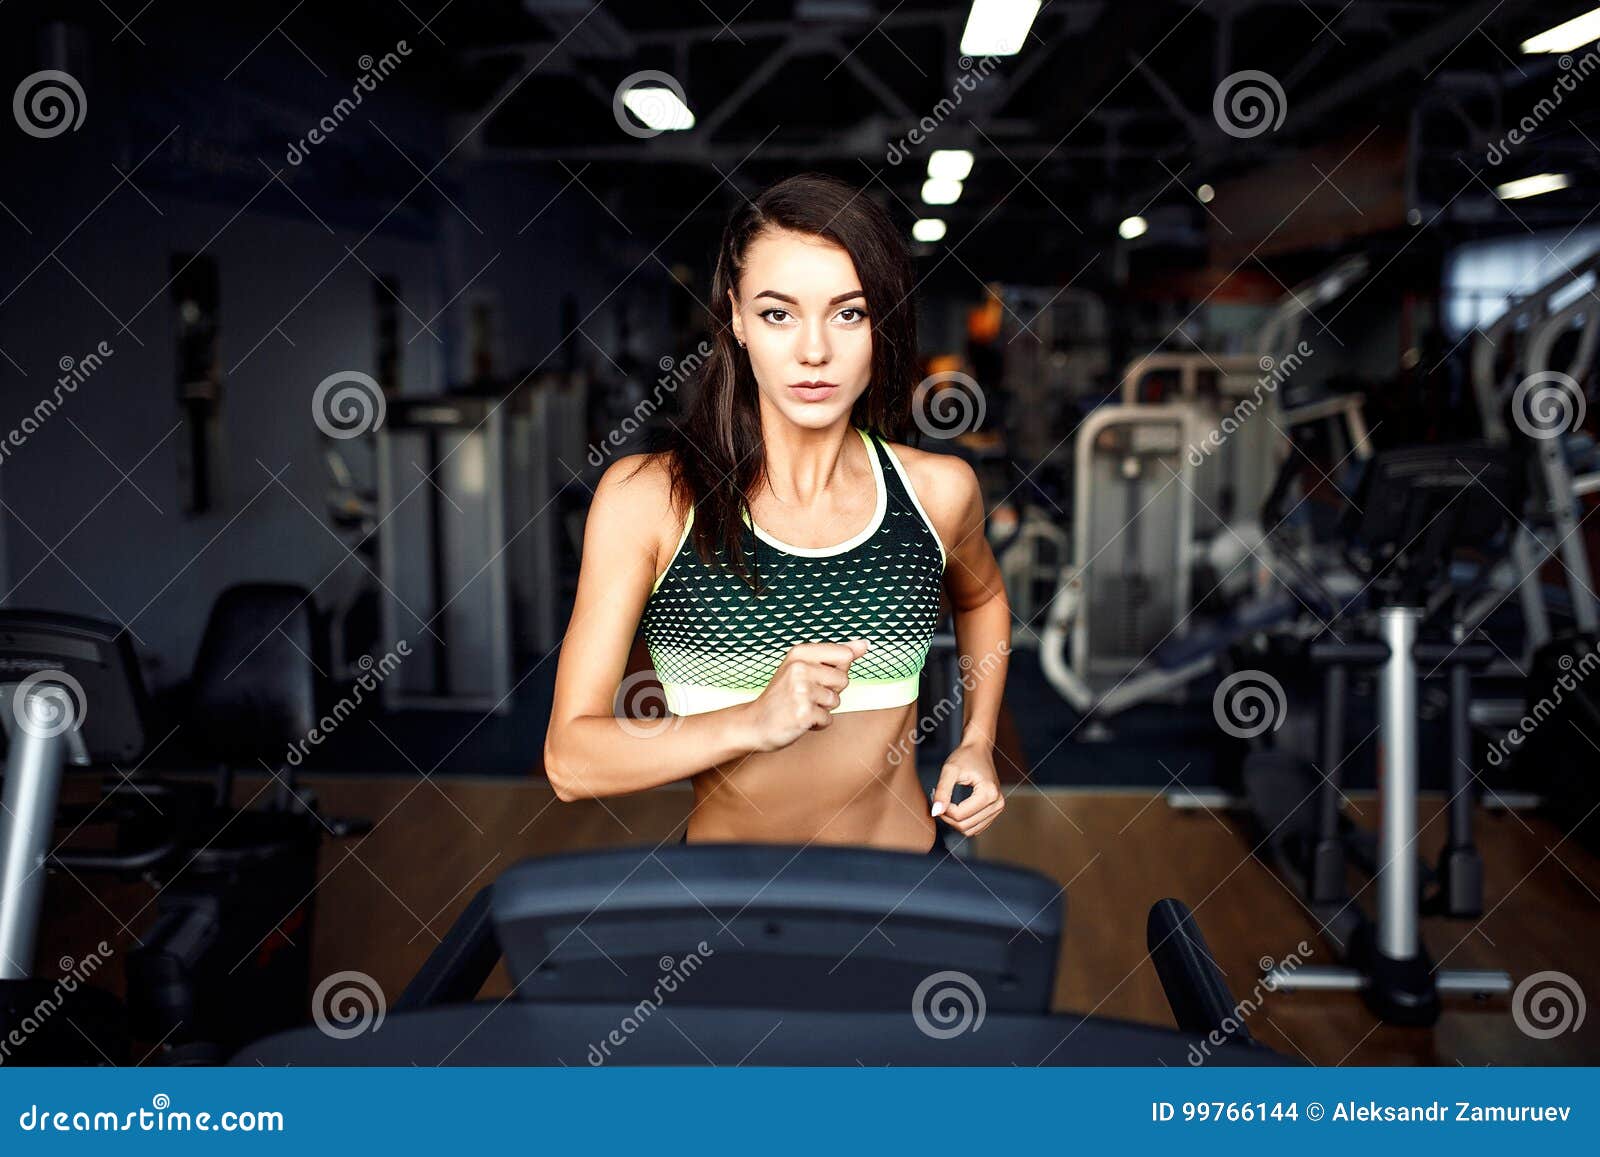 young fitness woman doing cardio exercises at the gym running on a treadmill.